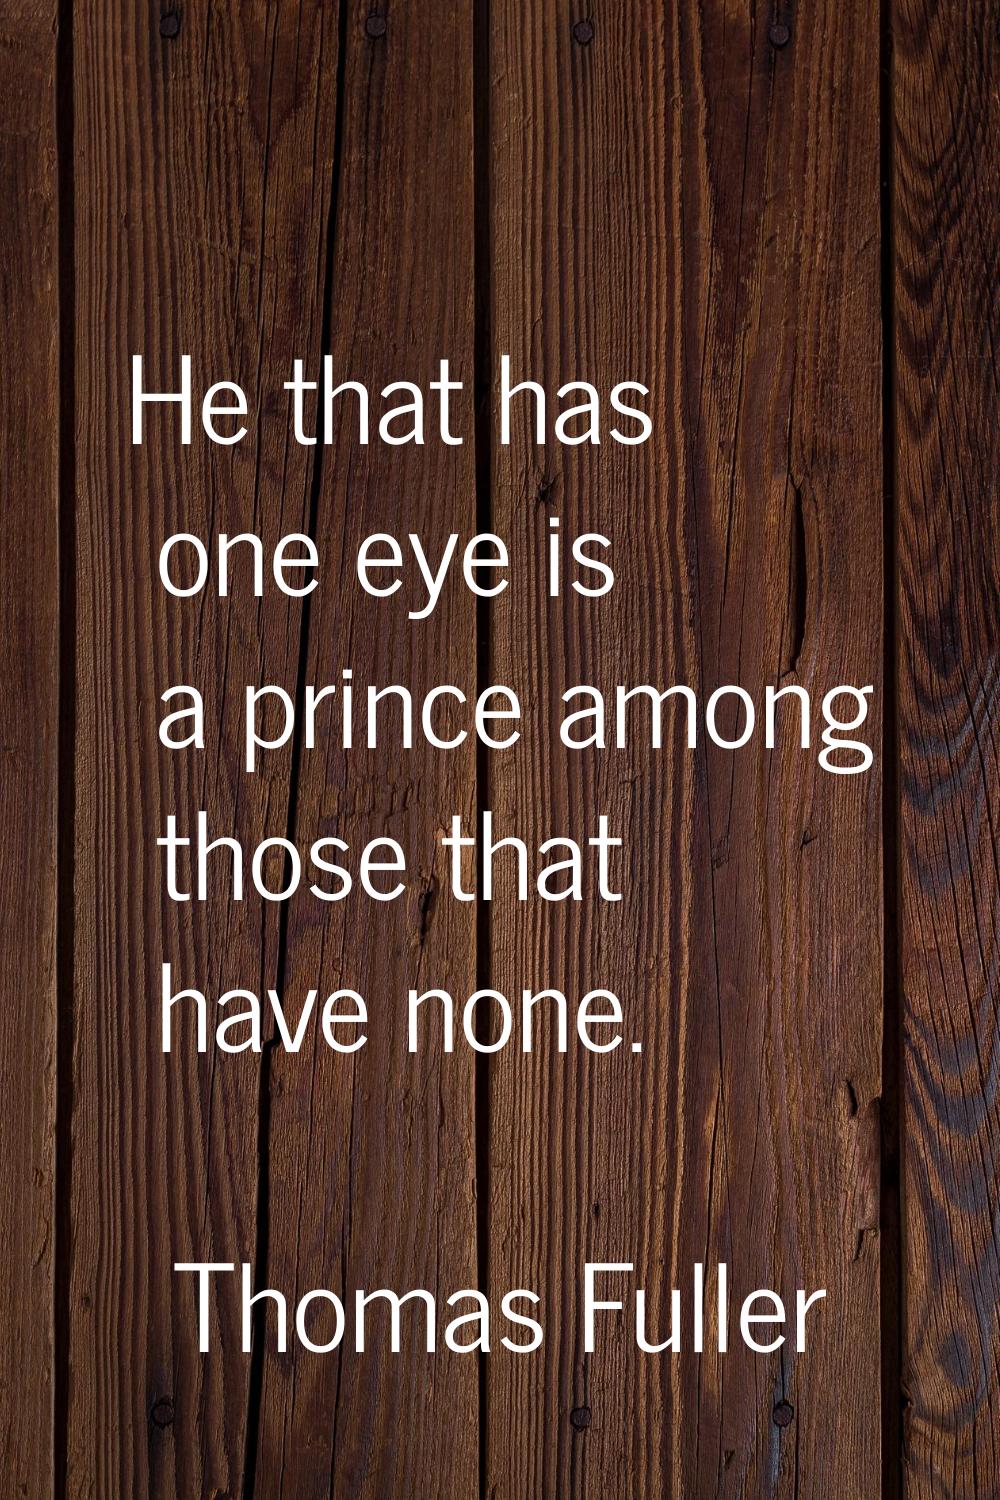 He that has one eye is a prince among those that have none.